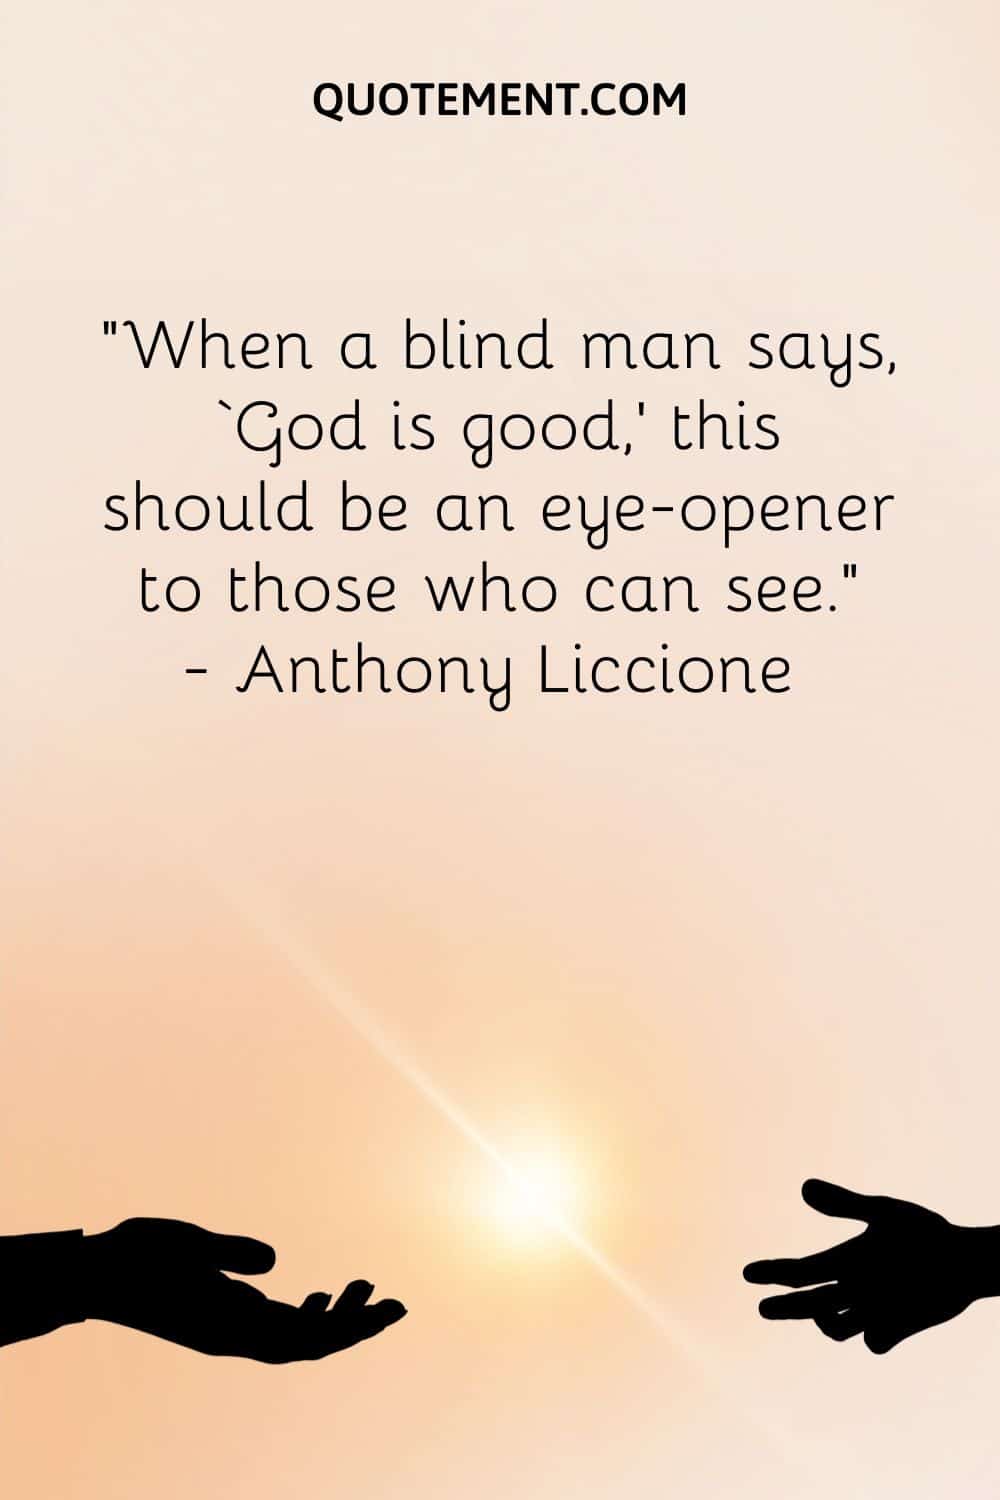 “When a blind man says, ‘God is good,’ this should be an eye-opener to those who can see.” ― Anthony Liccione